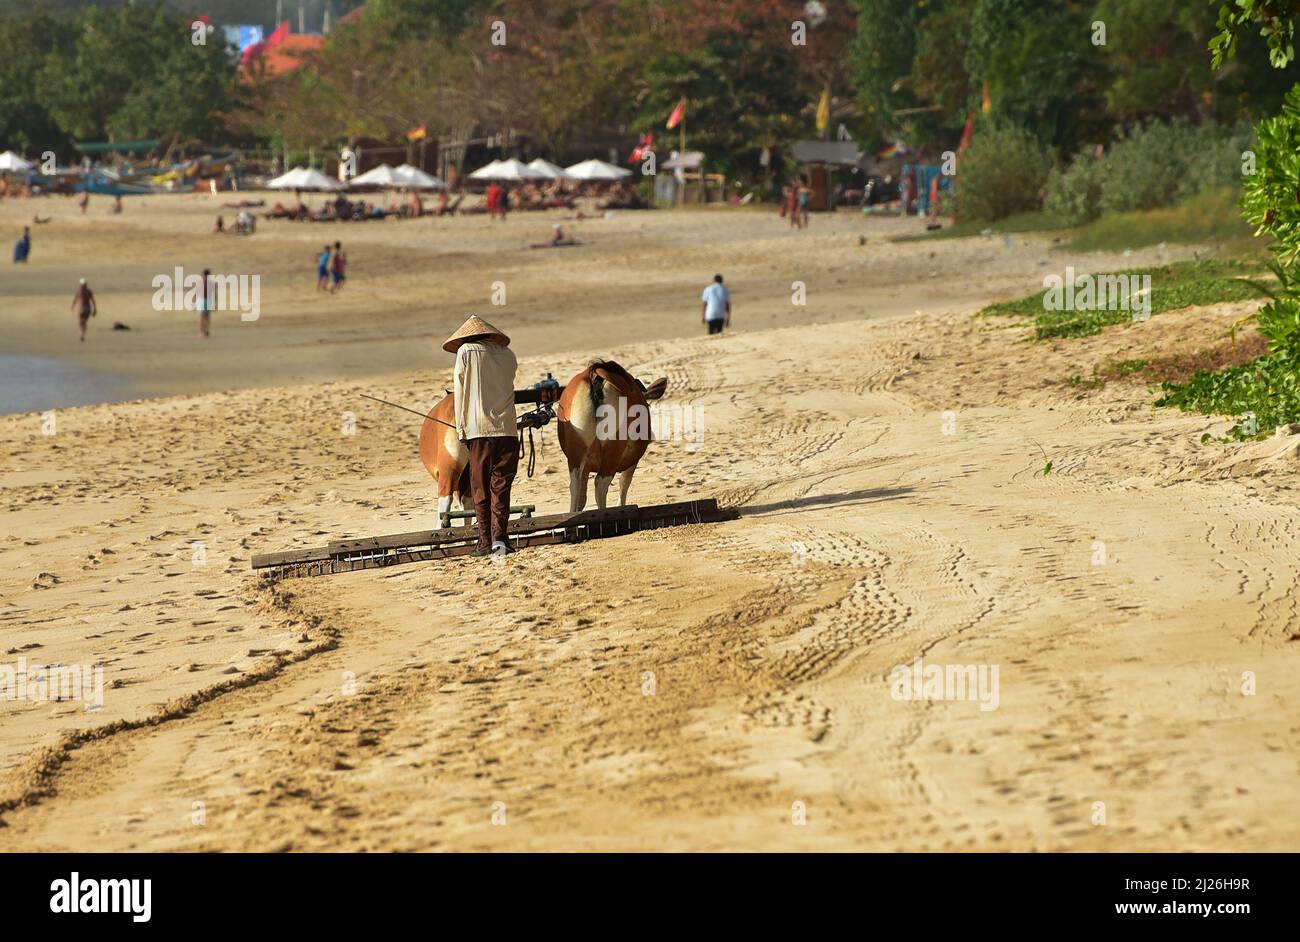 Indonesian man cleaning the beach in the morning with an oxcart. Jimbaran Beach, Bali, Indonesia Stock Photo